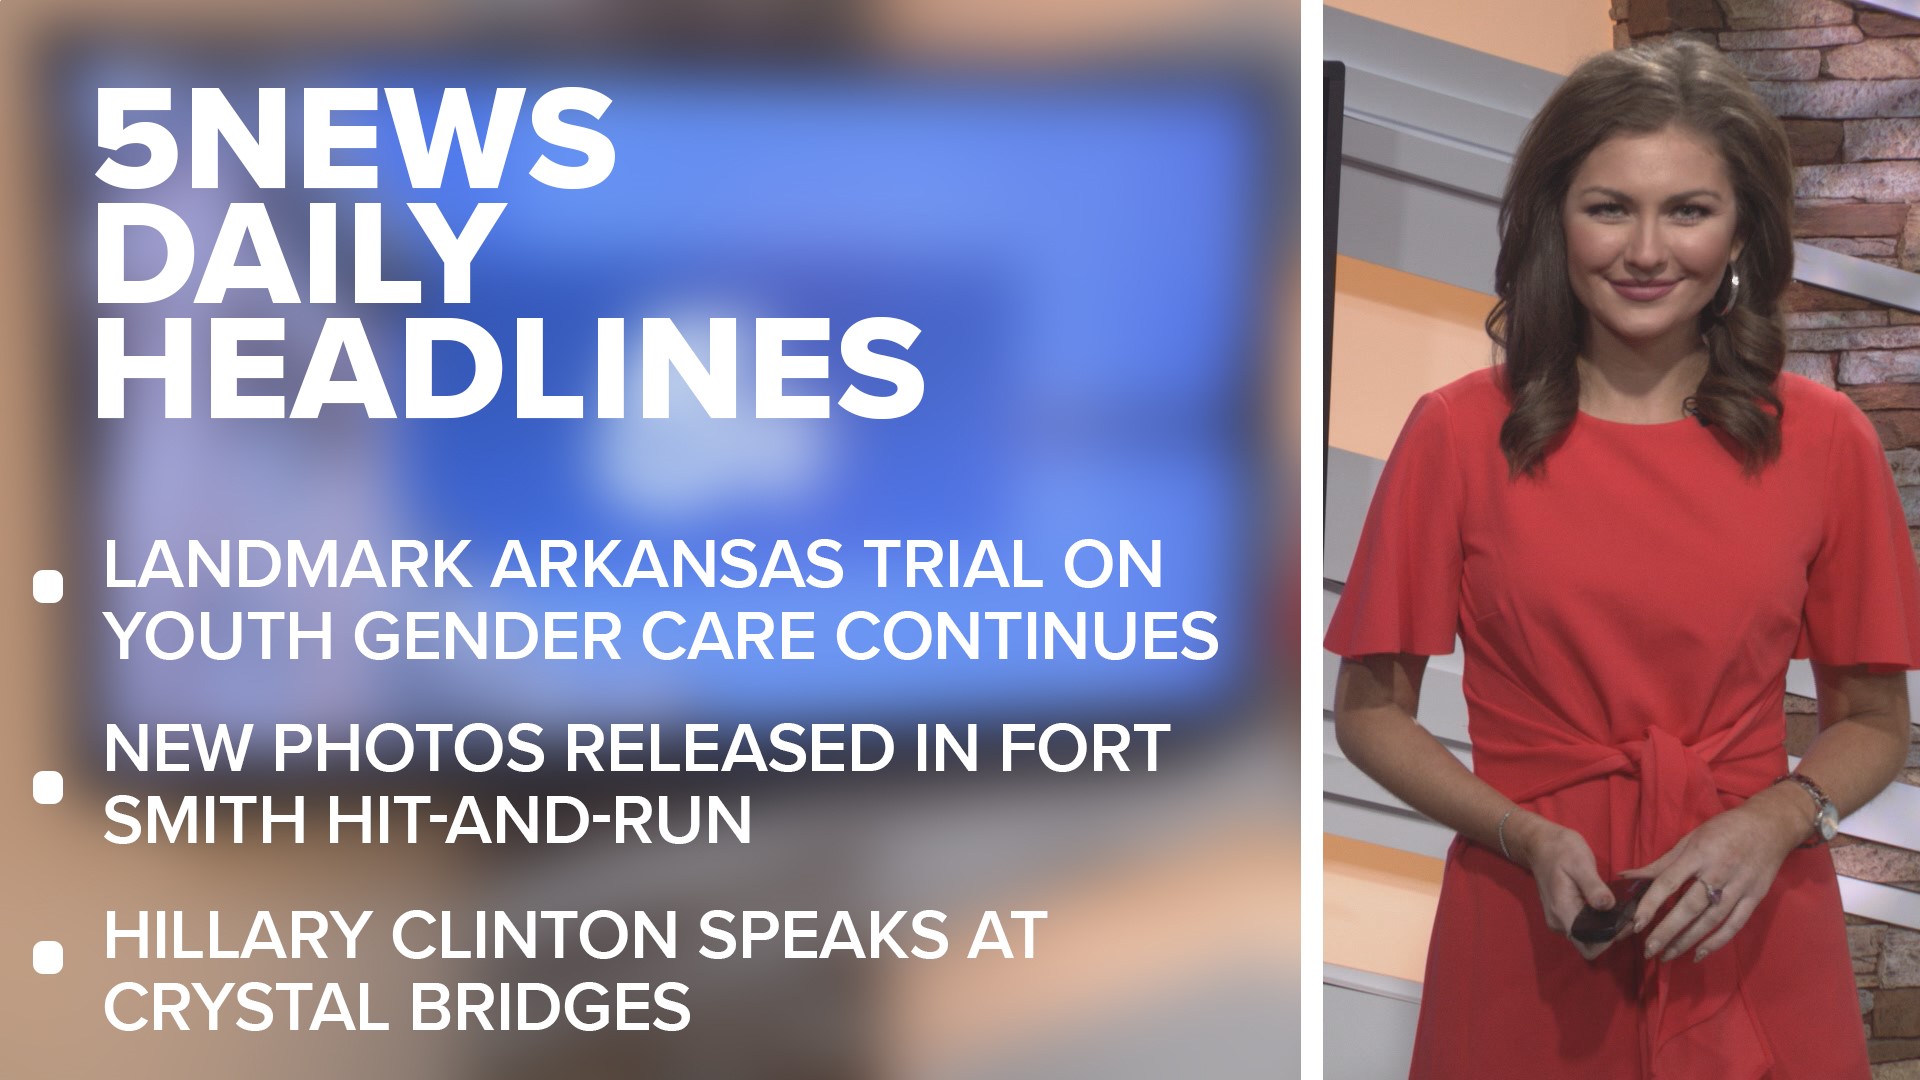 Daily headlines for local news across Northwest Arkansas and the River Valley for Dec. 01, 2022.